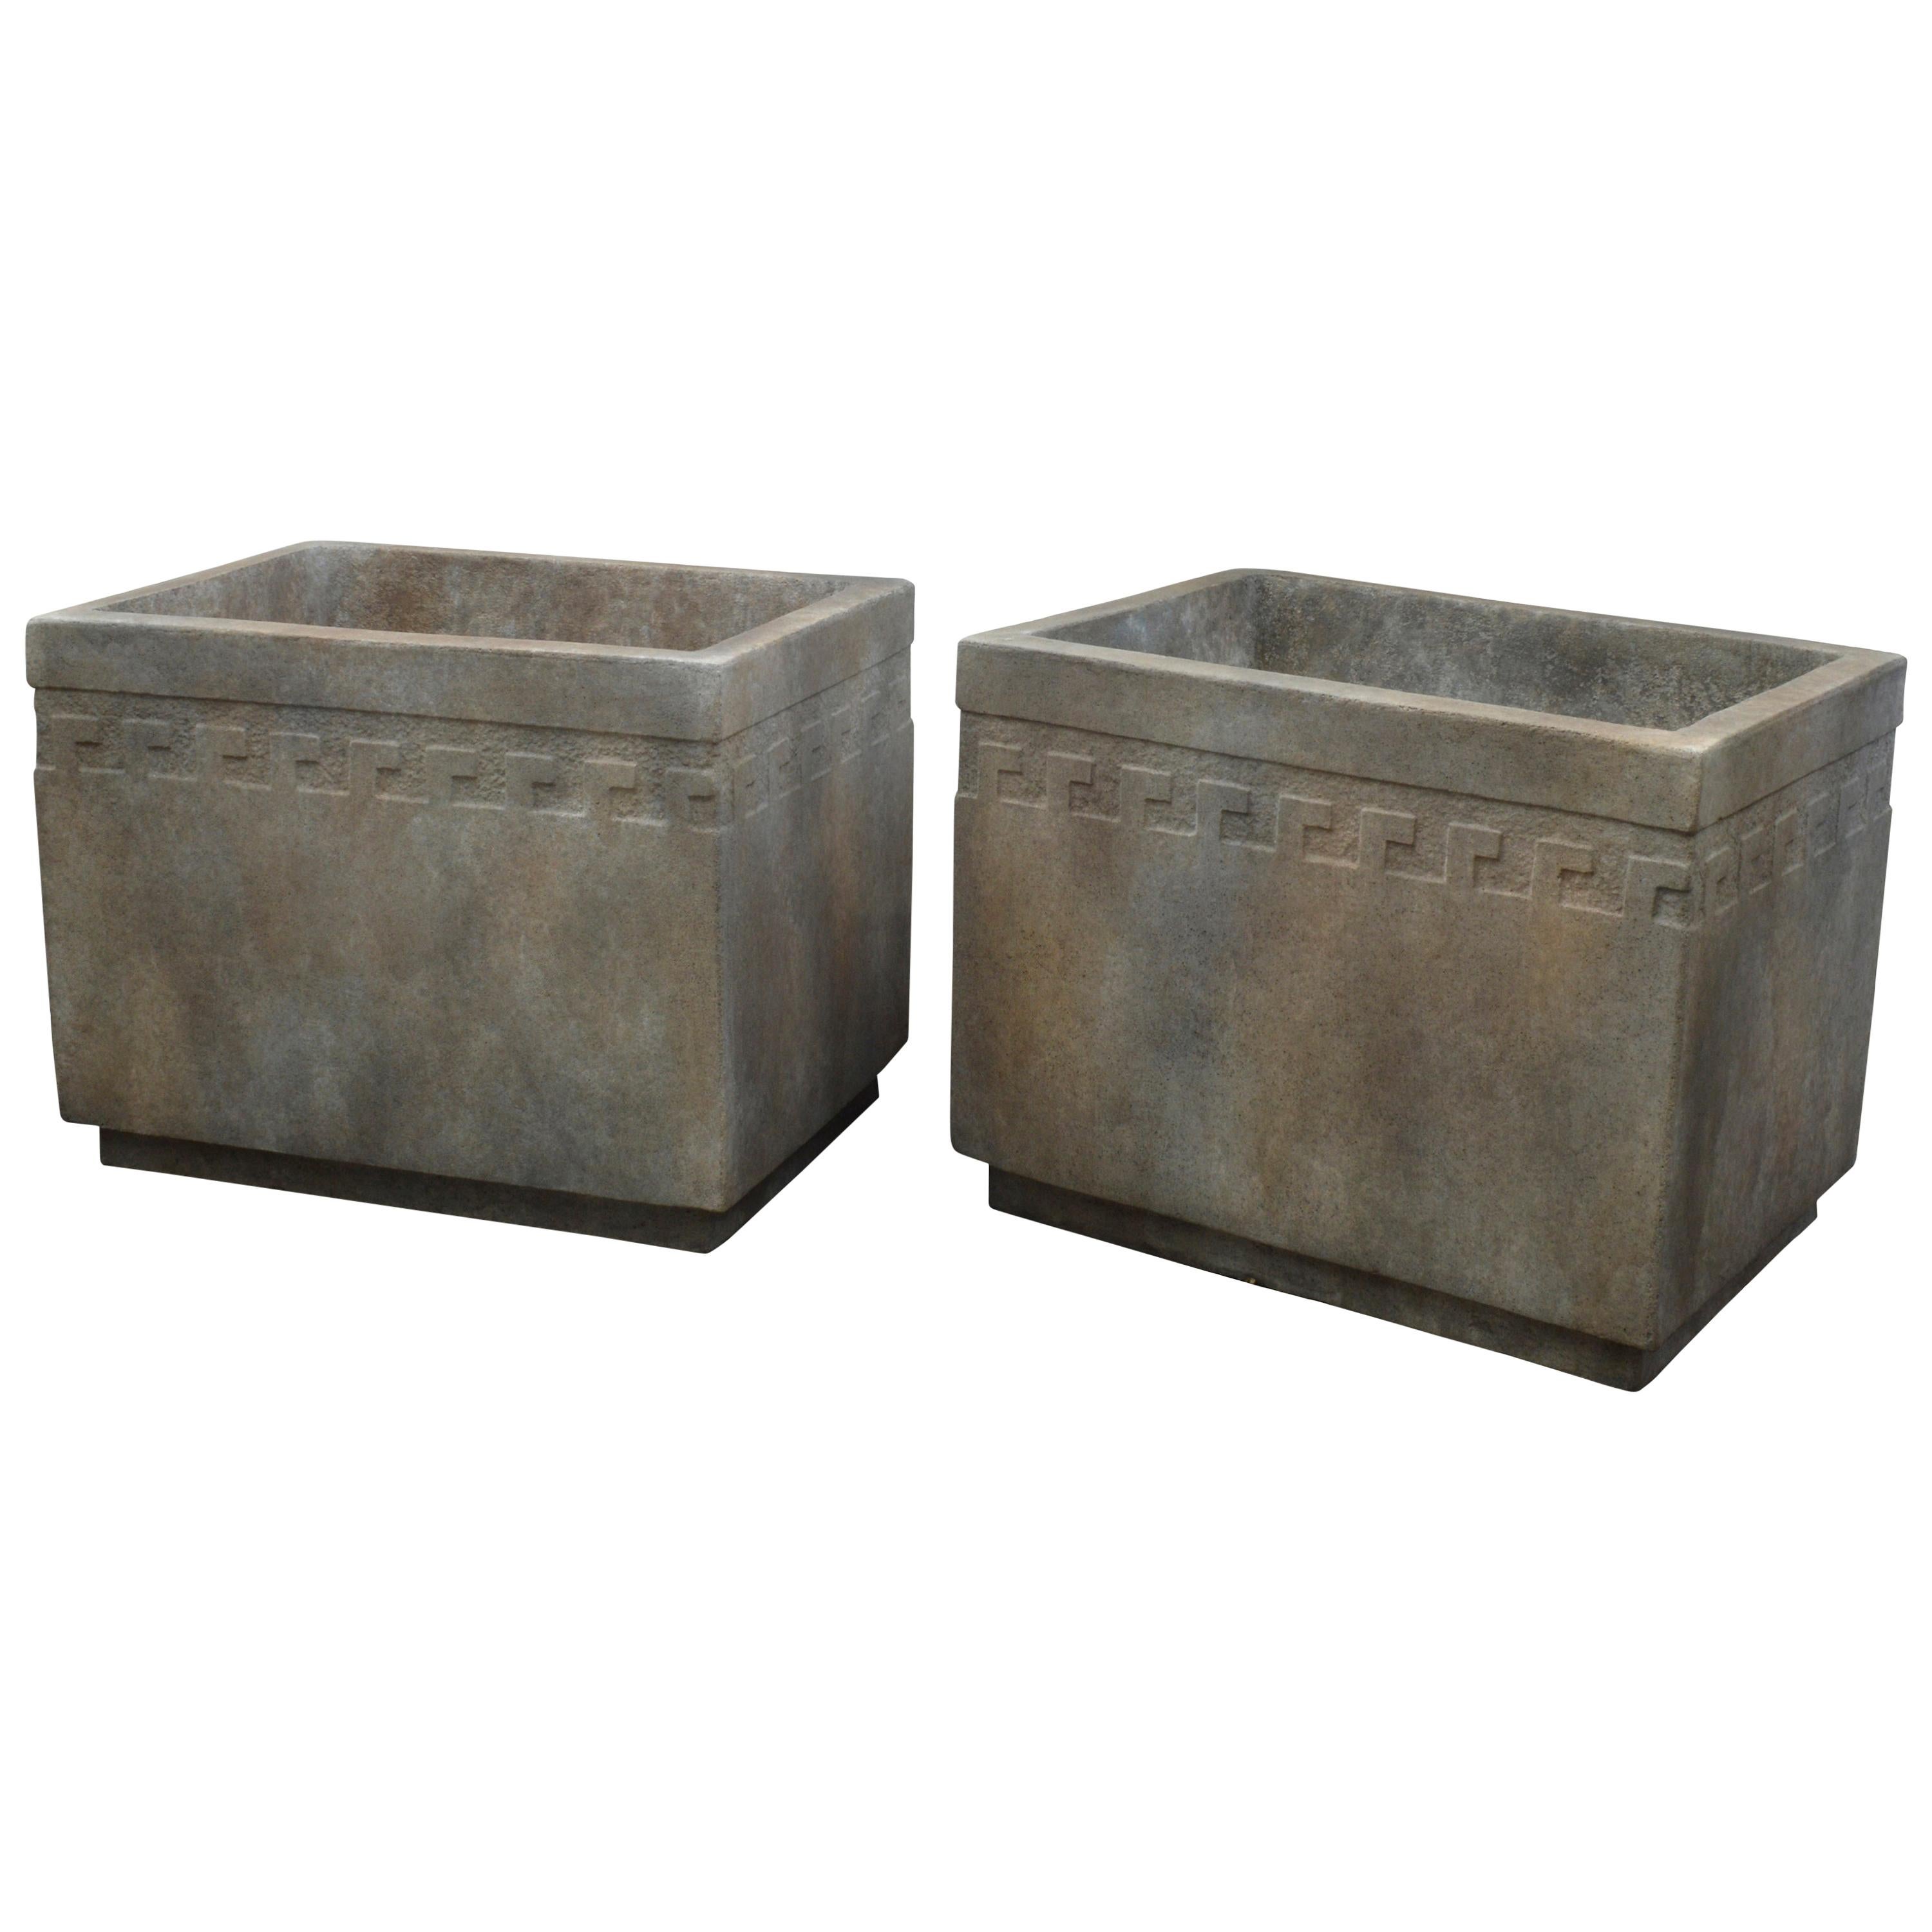 Rectangular Cement Planter with Greek Key Design For Sale